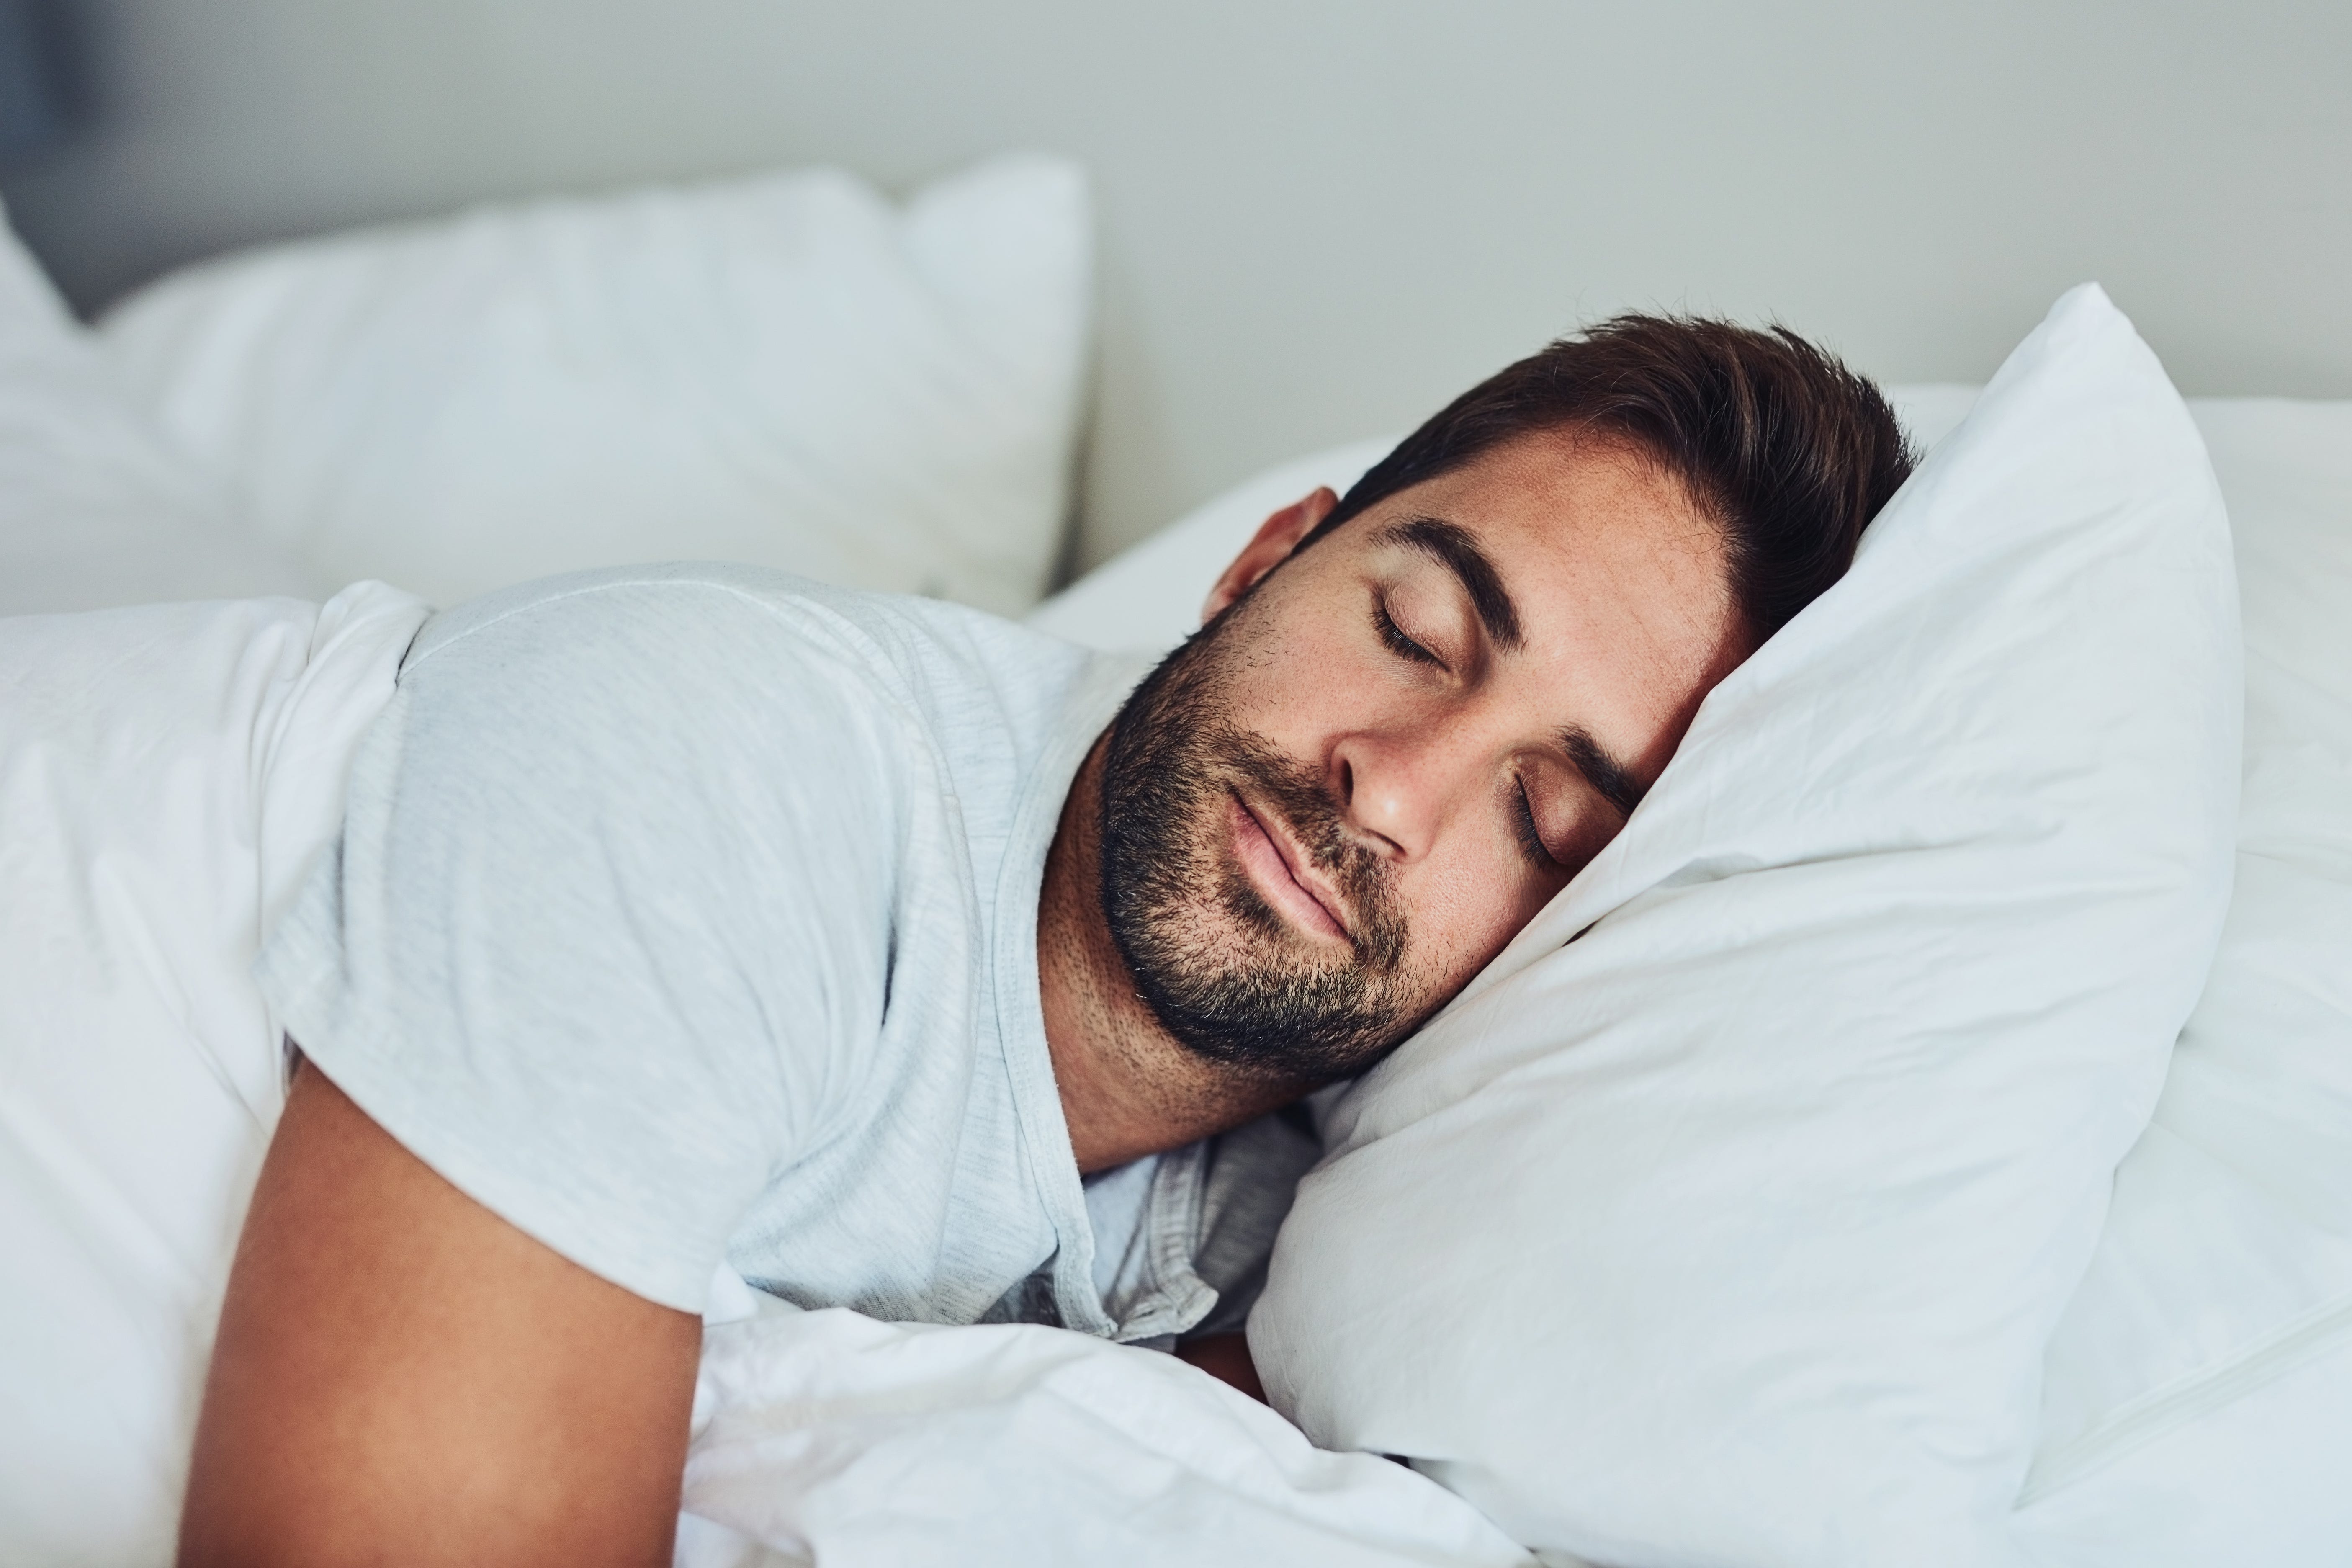 Sleeping less than six hours a night may boost risk of cardiovascular disease, says study